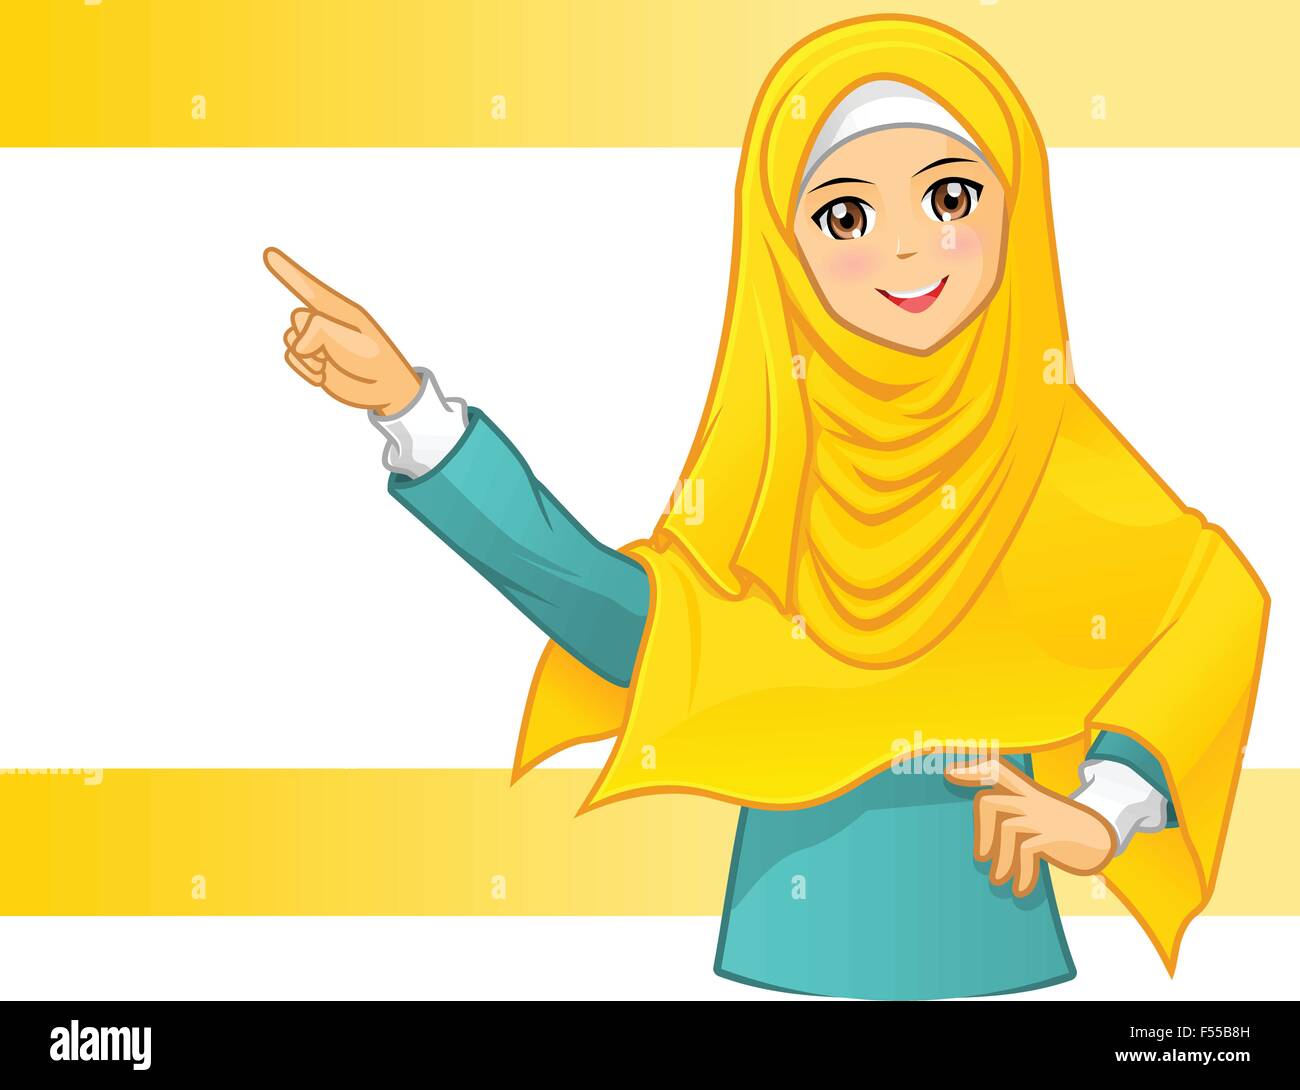 High Quality Muslim Woman Wearing Yellow Veil with Pointing Arms Cartoon Character Vector Illustration Stock Vector